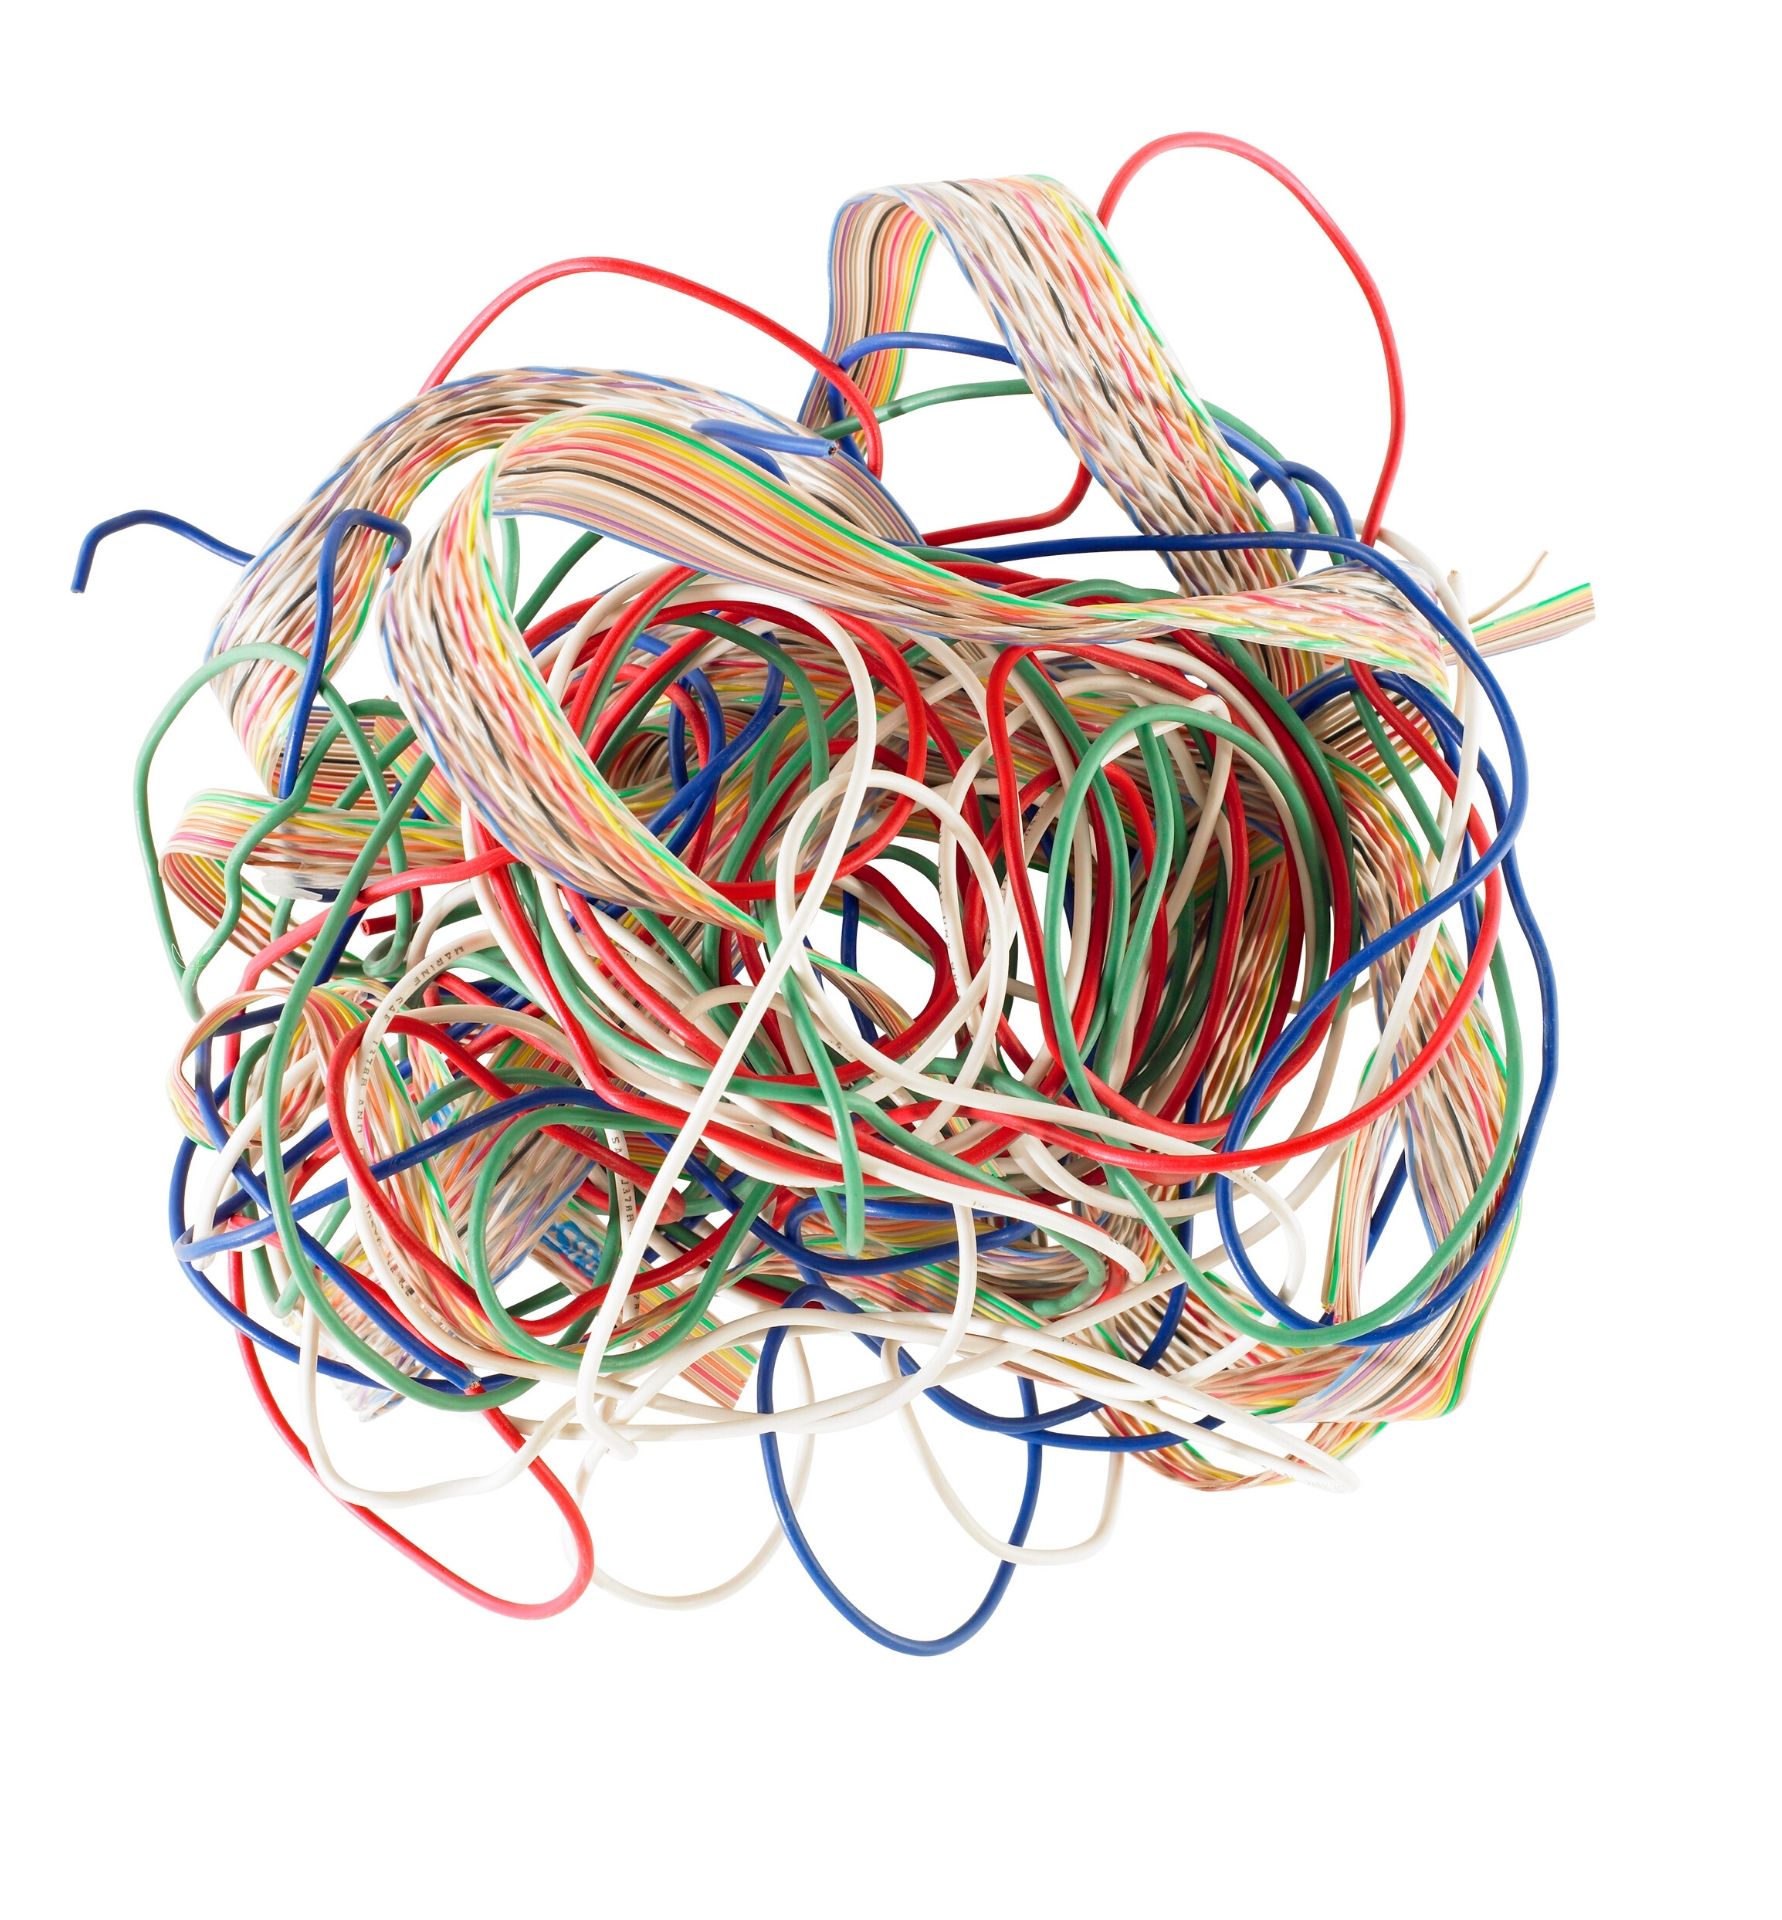 SCS, image of a tangled ball of colorful cords 